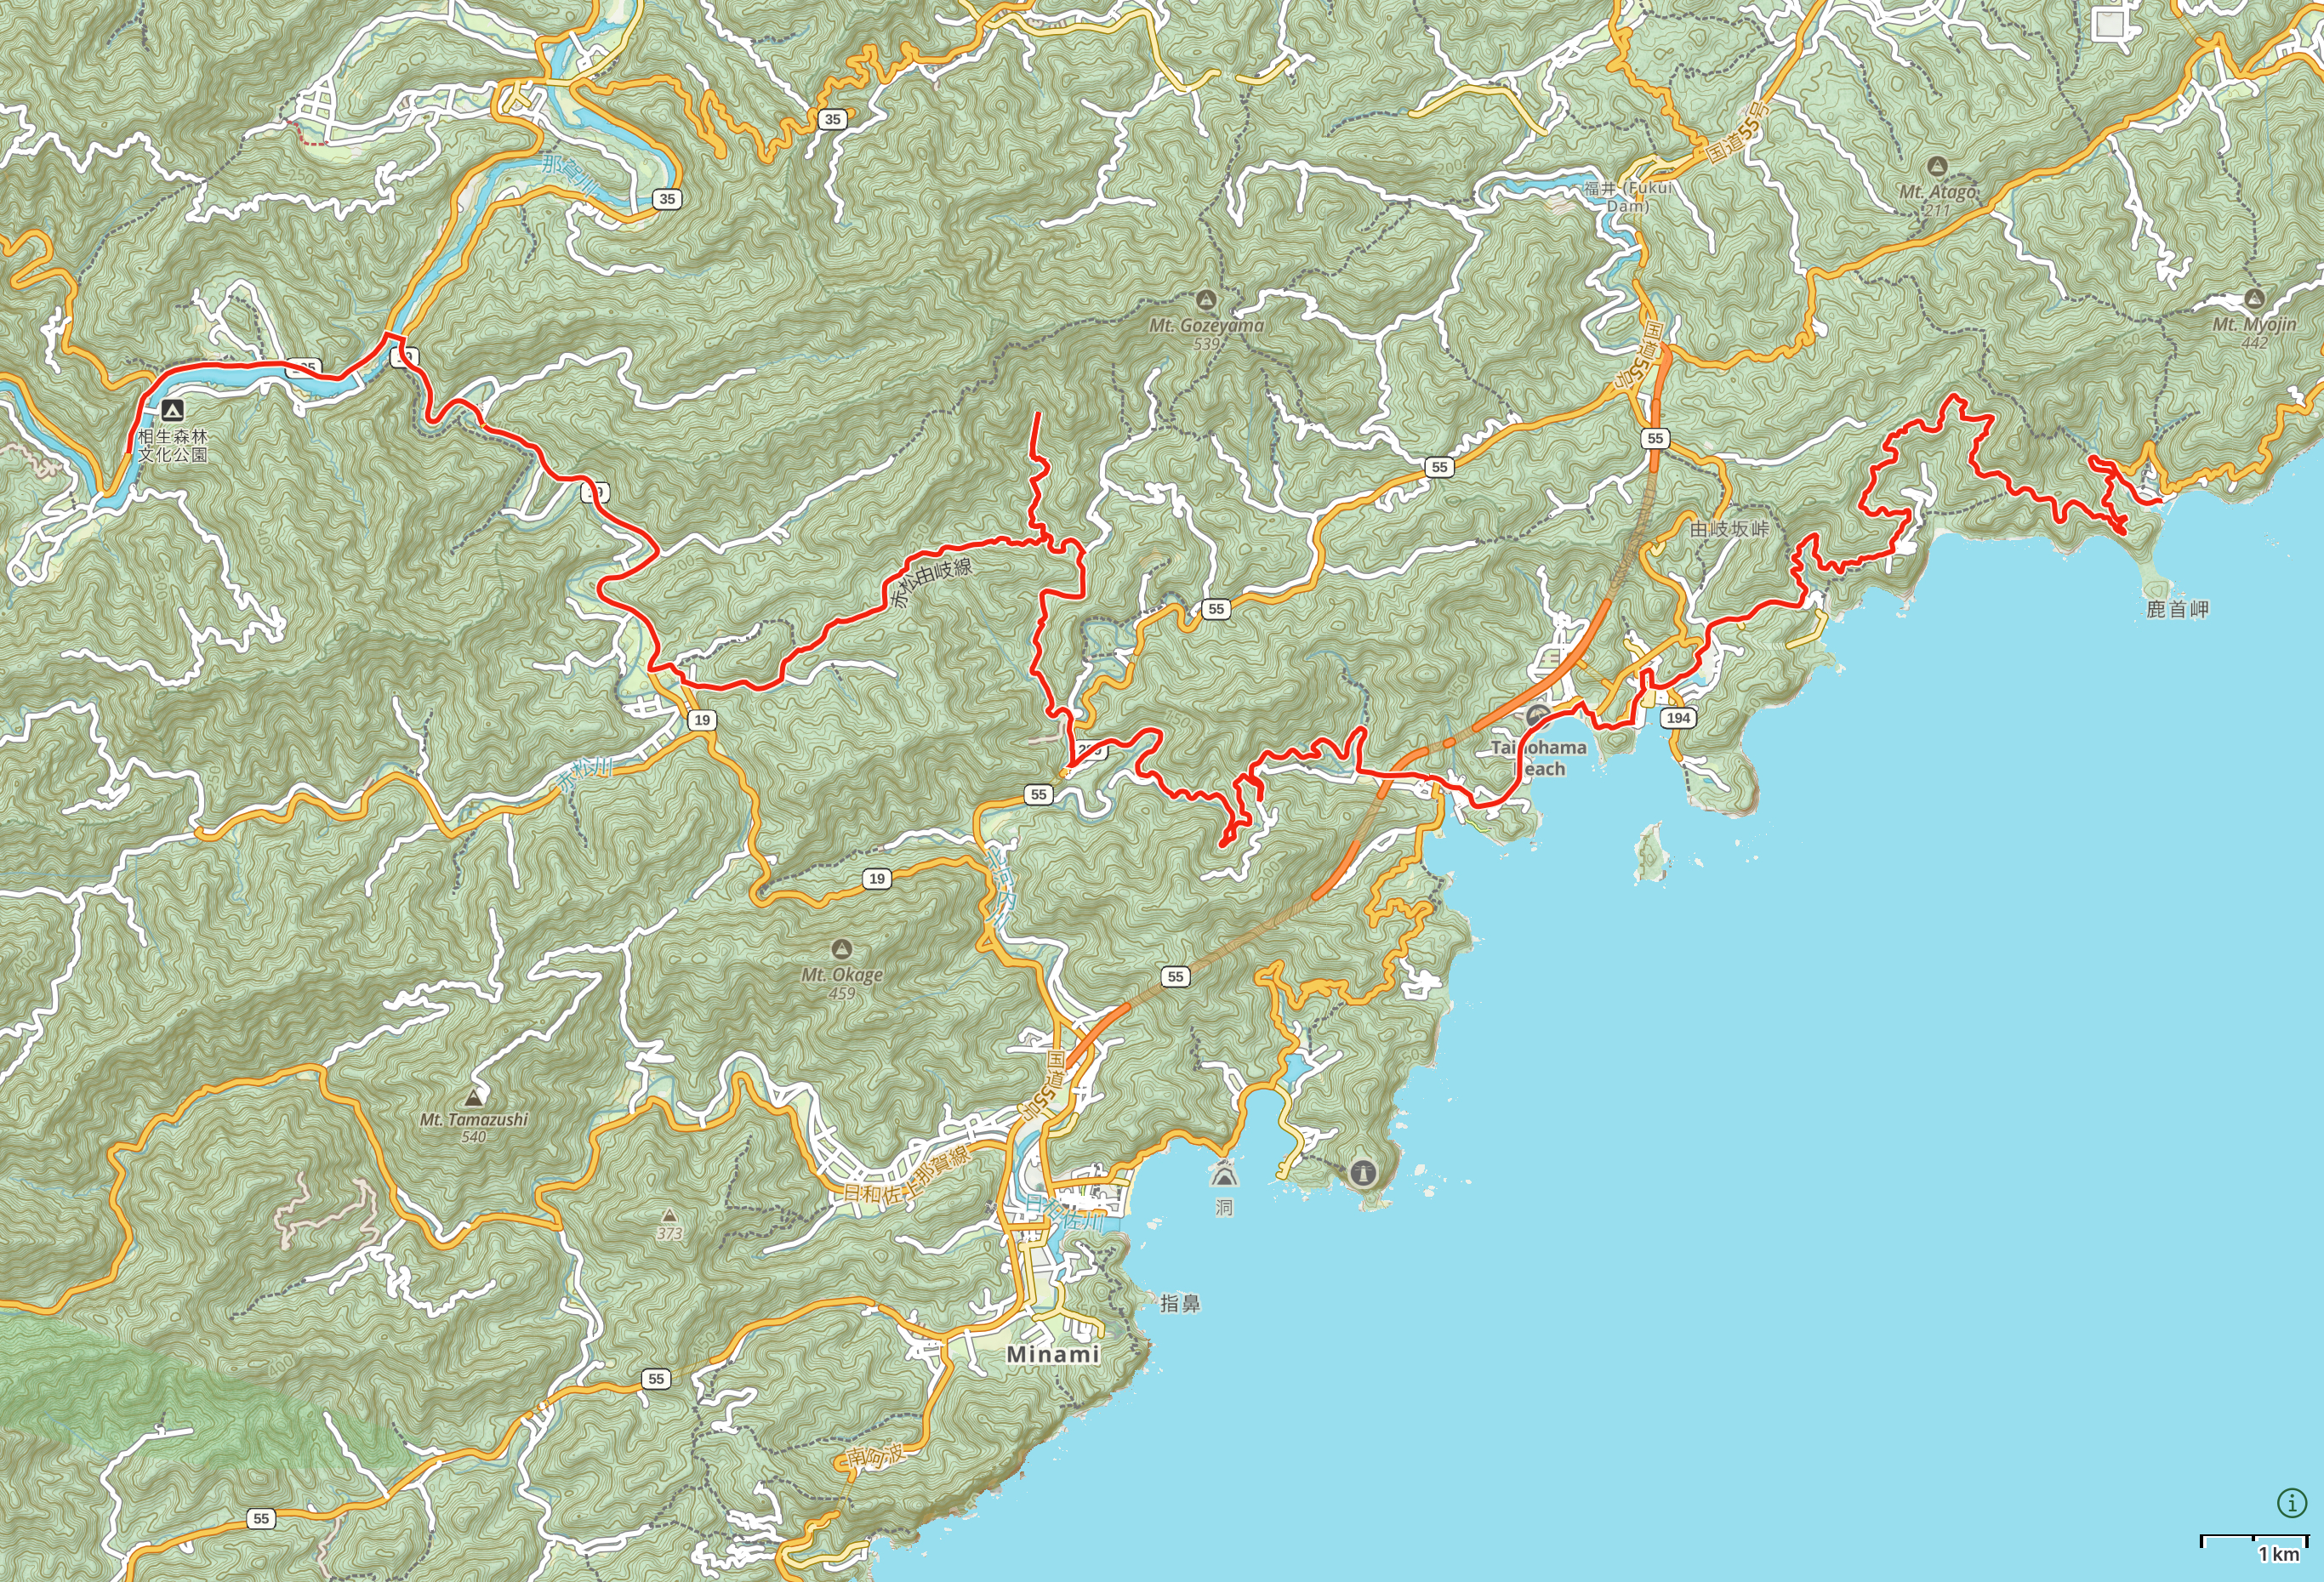 Map of Tokushima Prefecture with author’s route between Abu and Momijigawa Hot Spring highlighted.